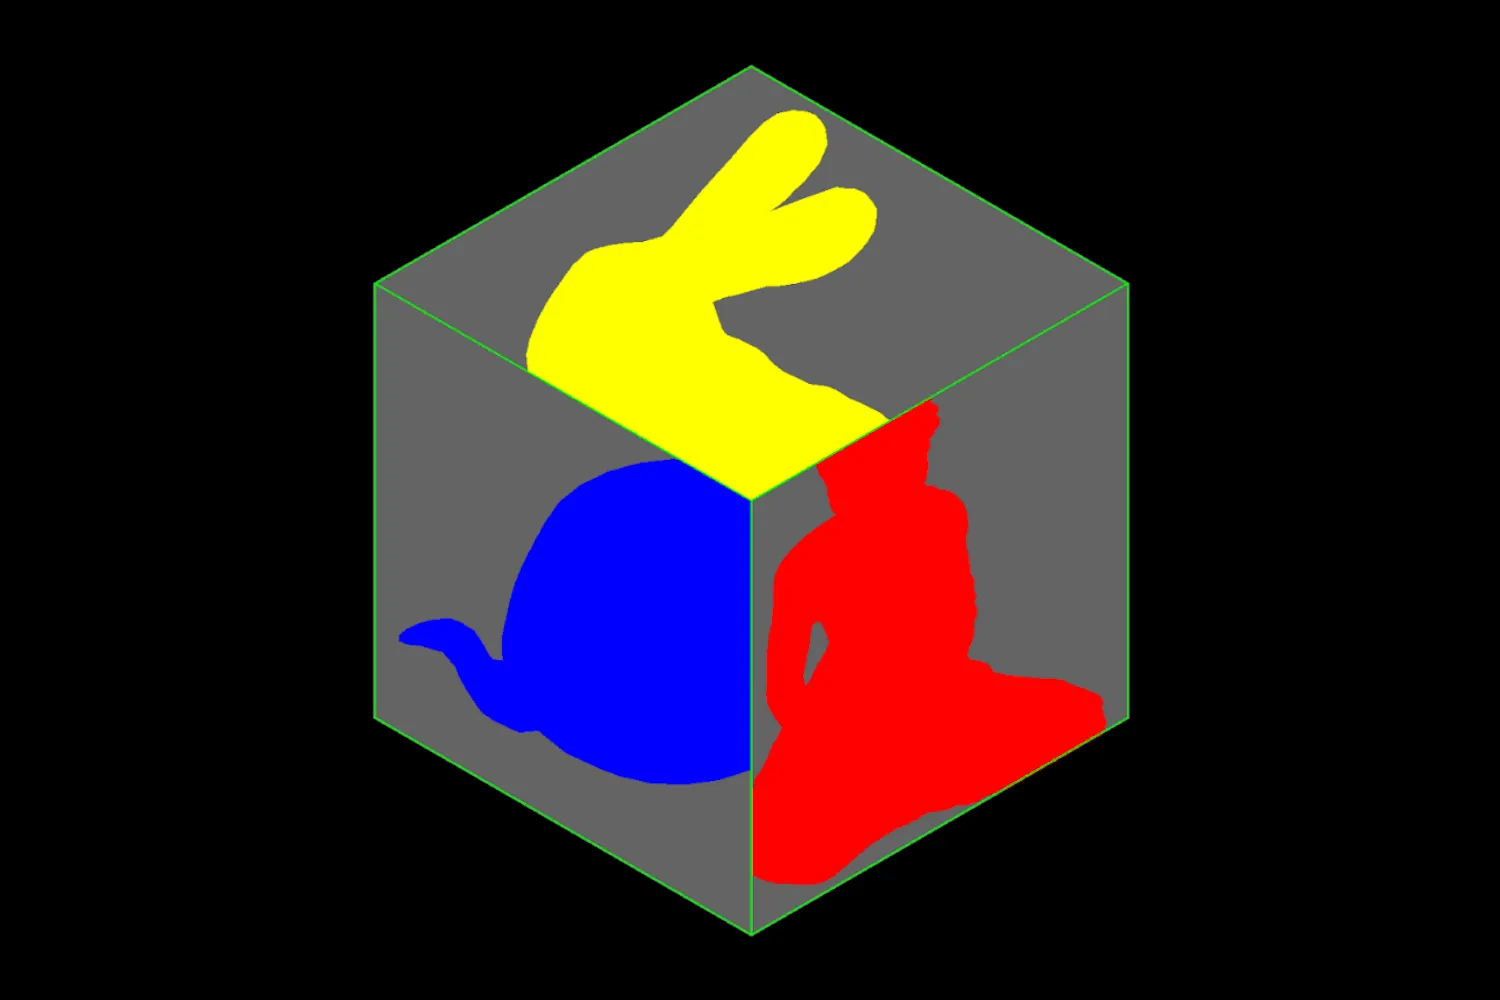 A non-Euclidean geometry cube with faces showcasing teapot, bunny, and Buddha models.